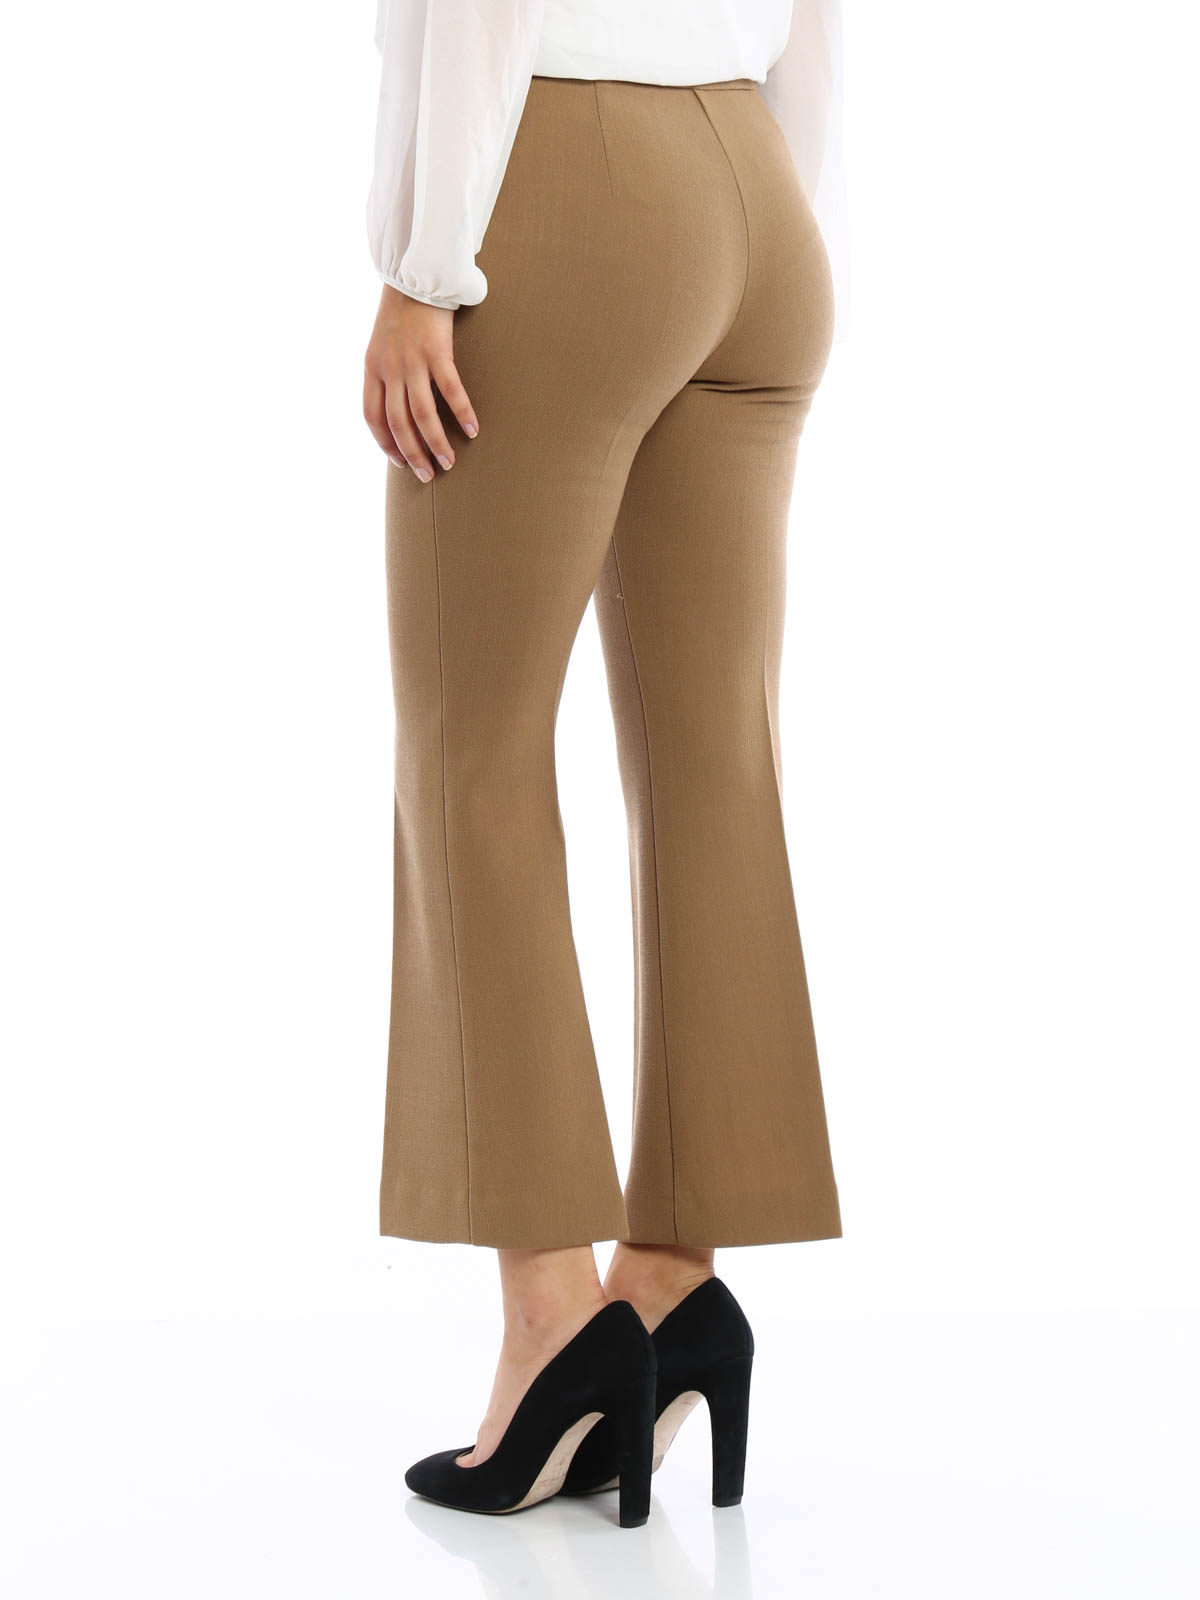 Buy Off White Crepe Linen Wide Legged Trousers with Front Zipper Online at  Jayporecom